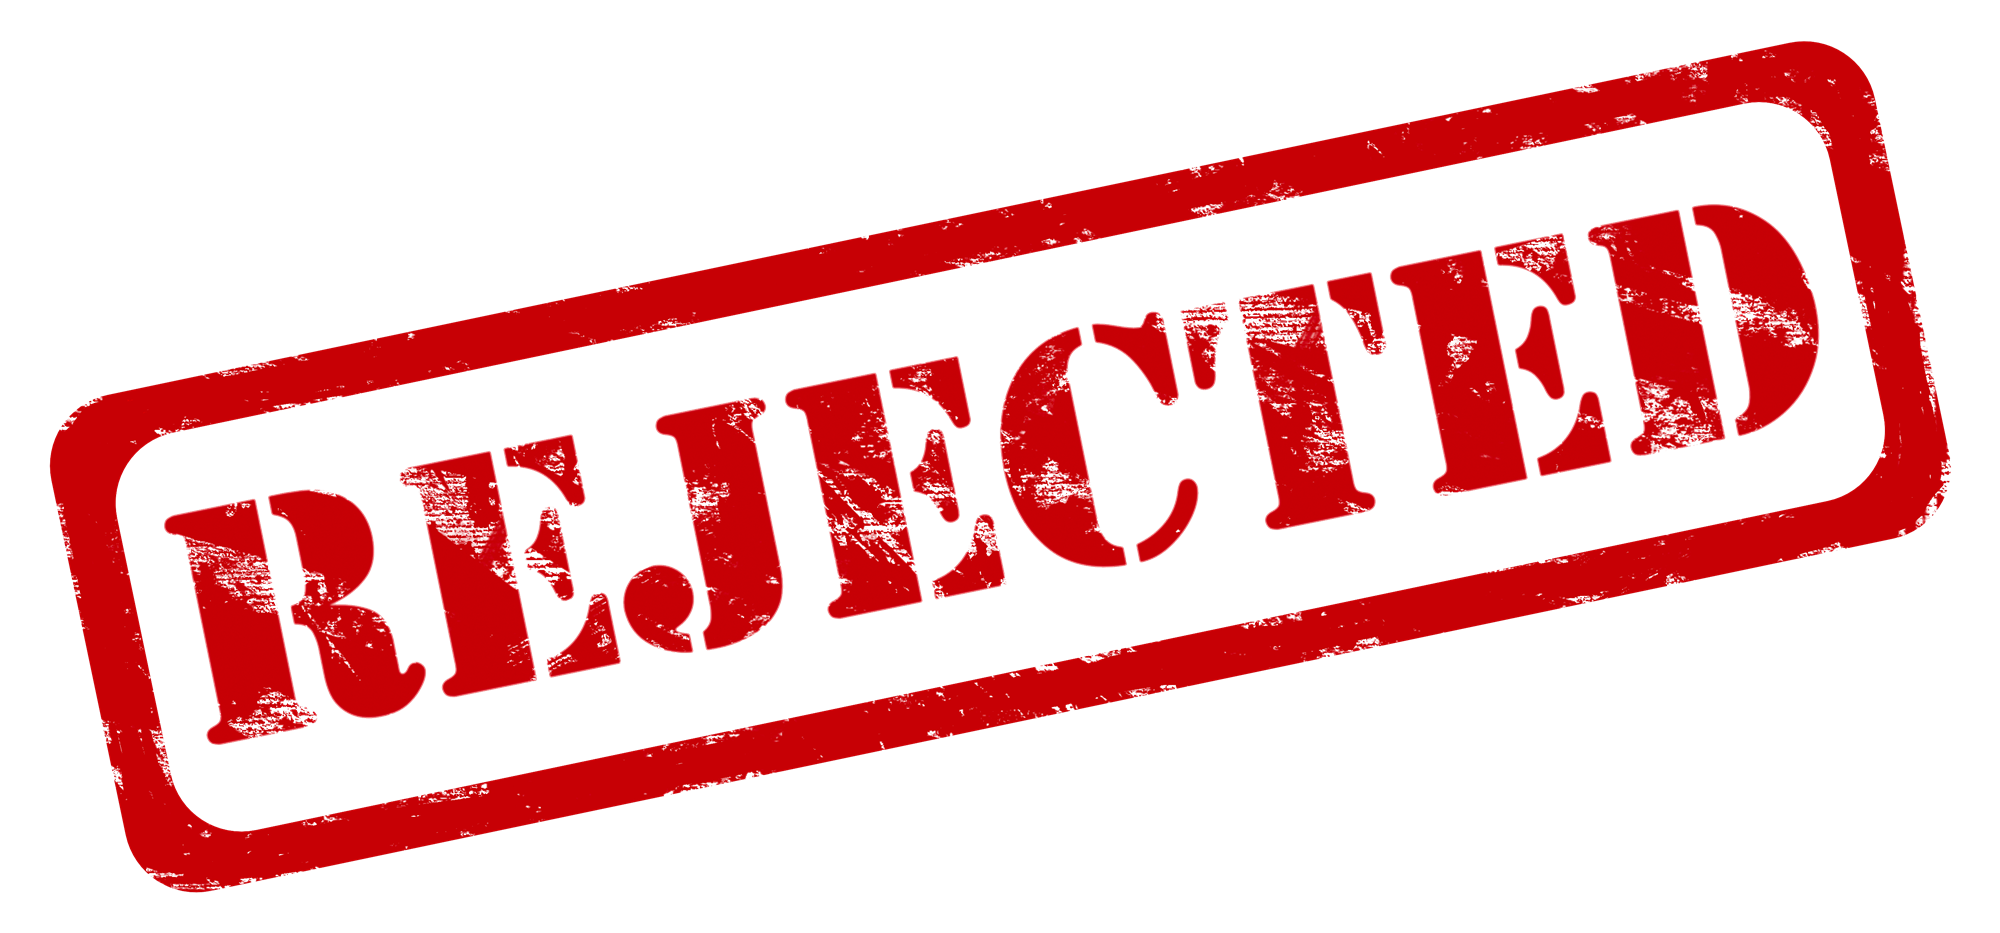 Rejected Stamp PNG - 3880